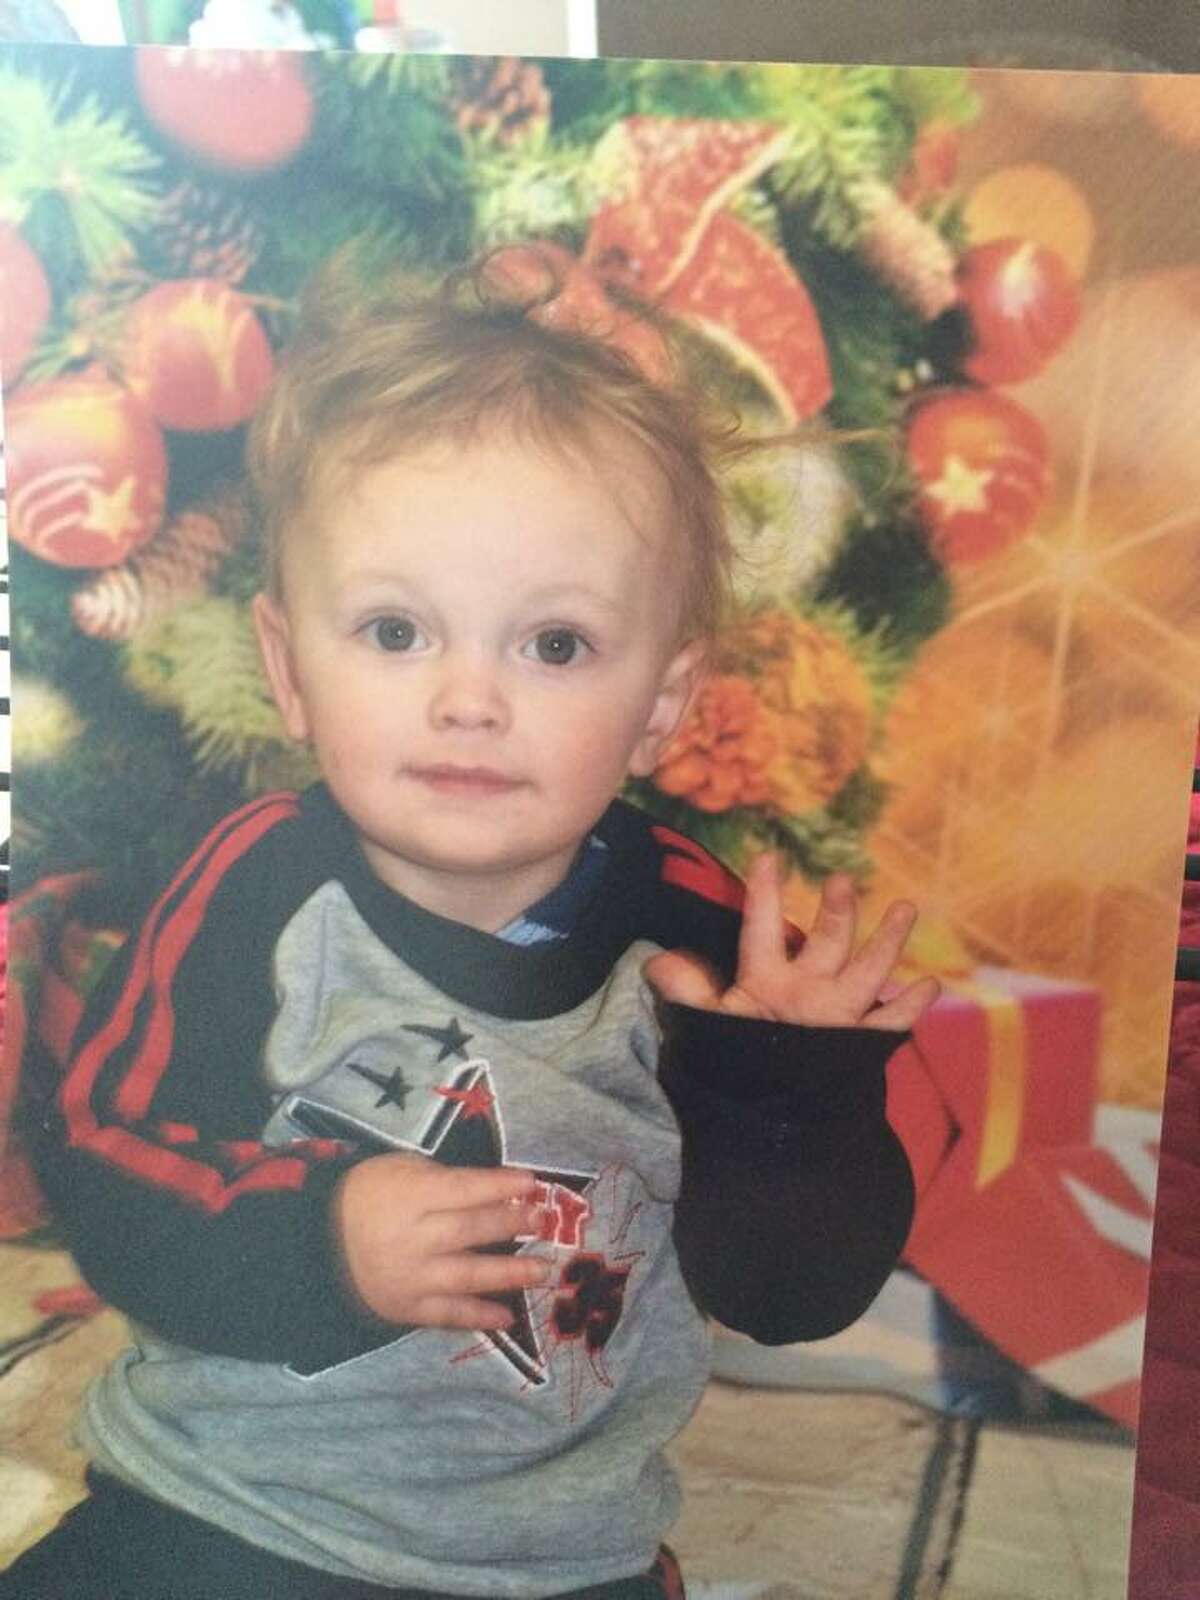 Eli James "EJ" Hotaling, 1, of Canajoharie, died Dec. 9 after swallowing liquid nicotine. ORG XMIT: q8OU2lO-xc43GF8FQSoY